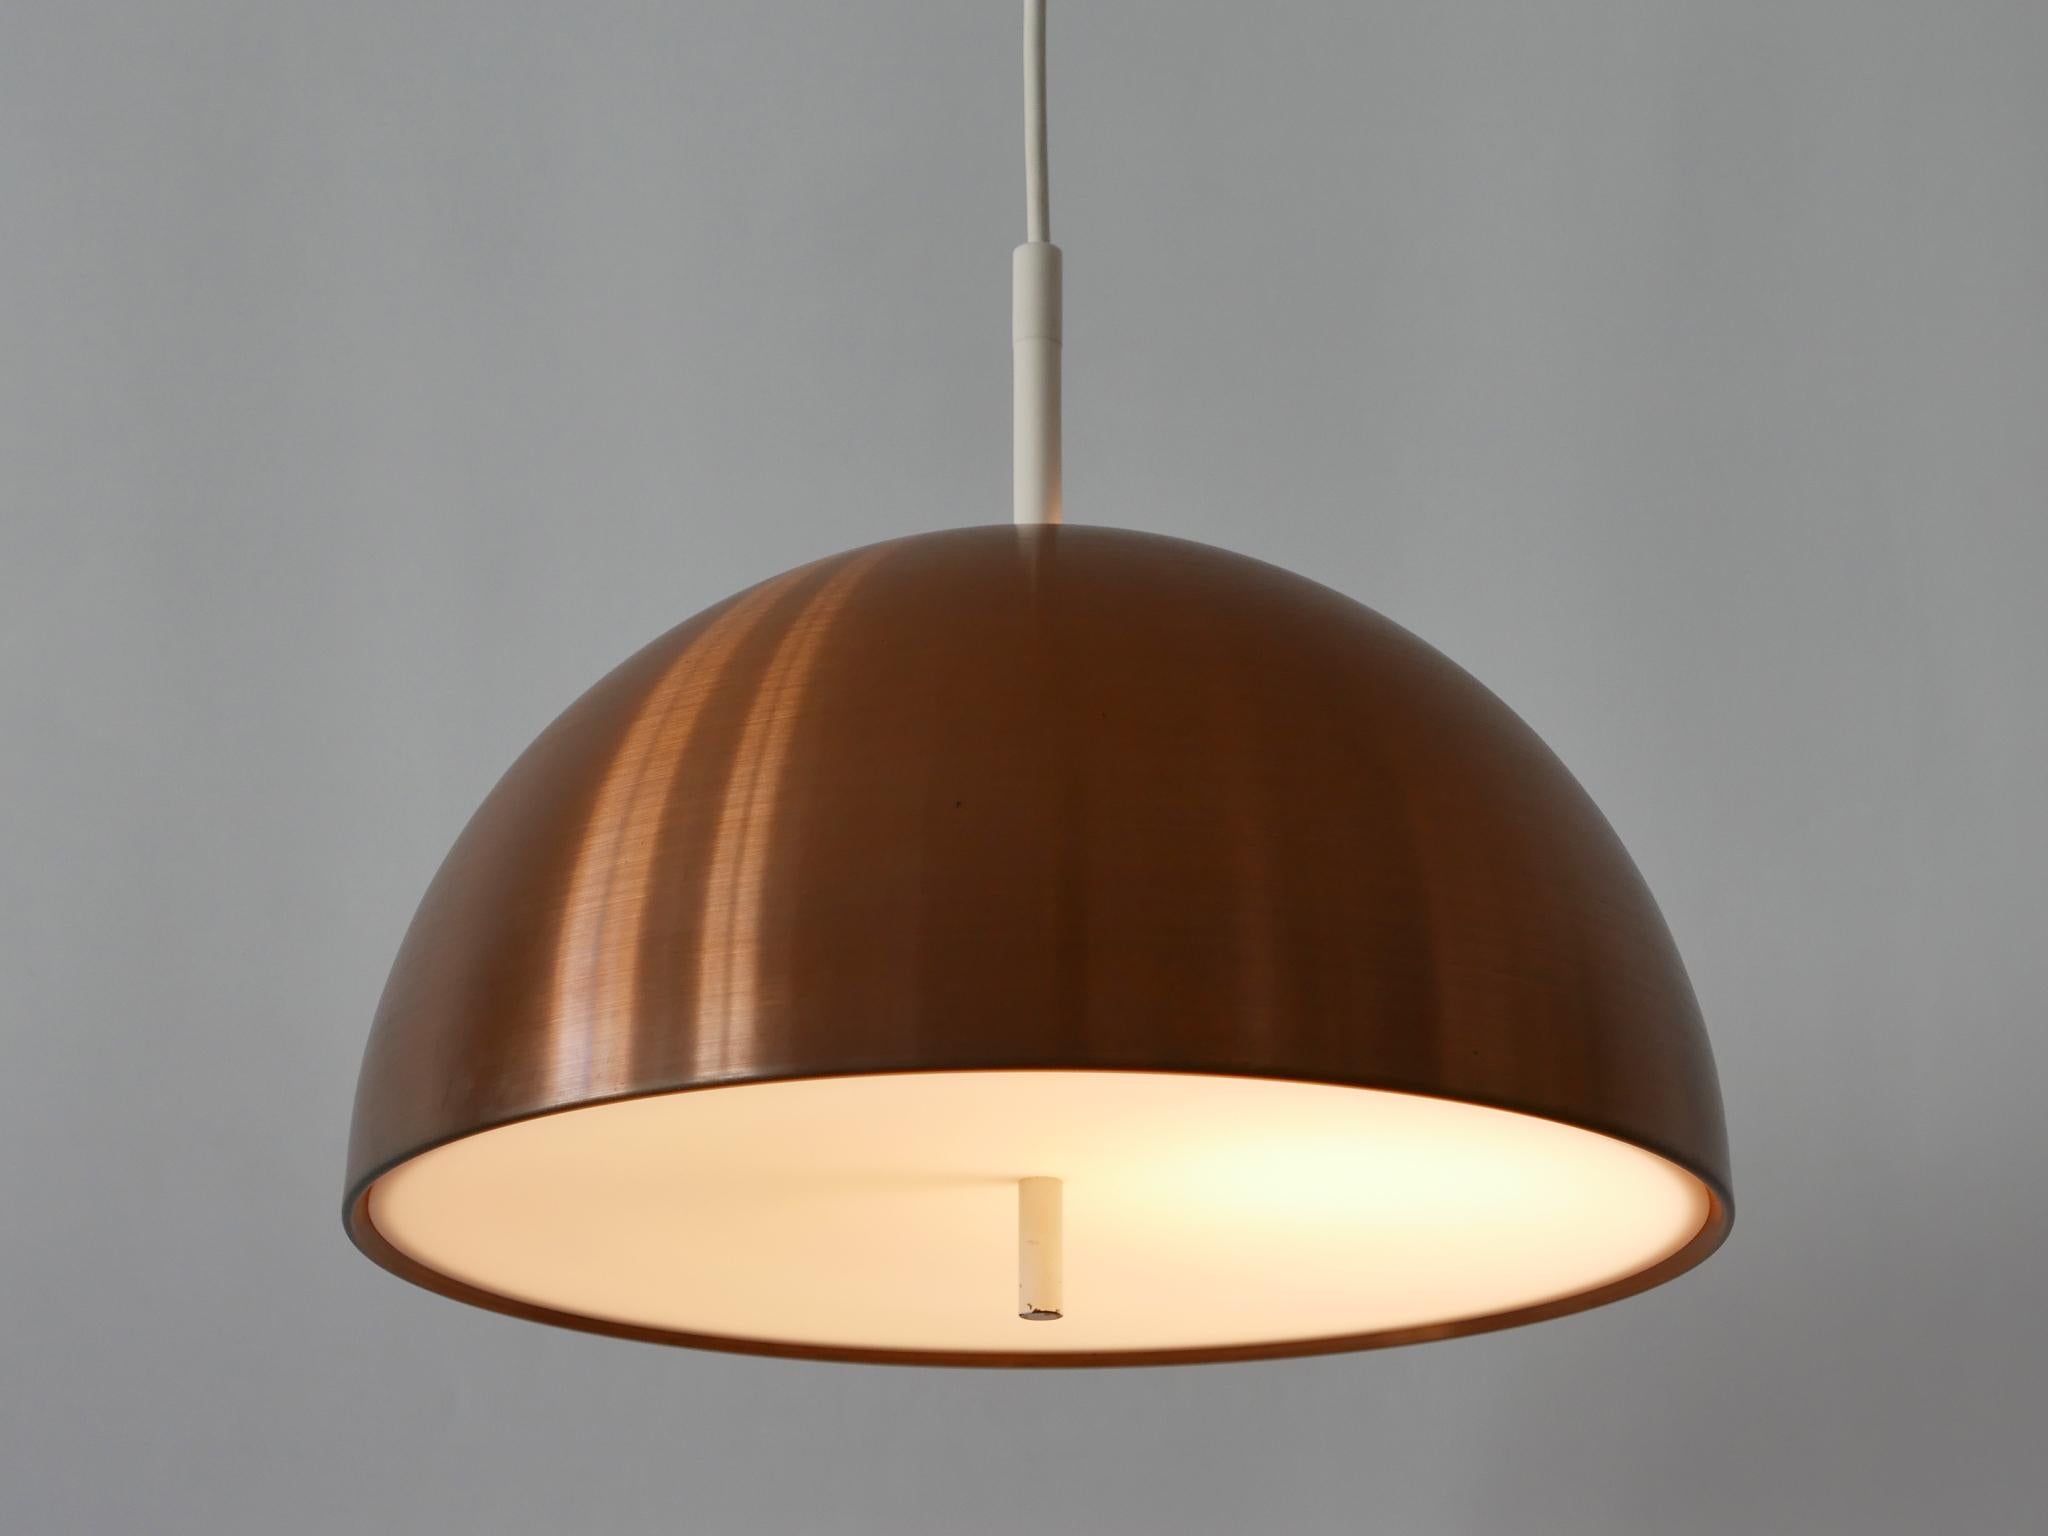 Mid-20th Century Elegant Mid-Century Modern Copper Pendant Lamp by Staff & Schwarz Germany, 1960s For Sale